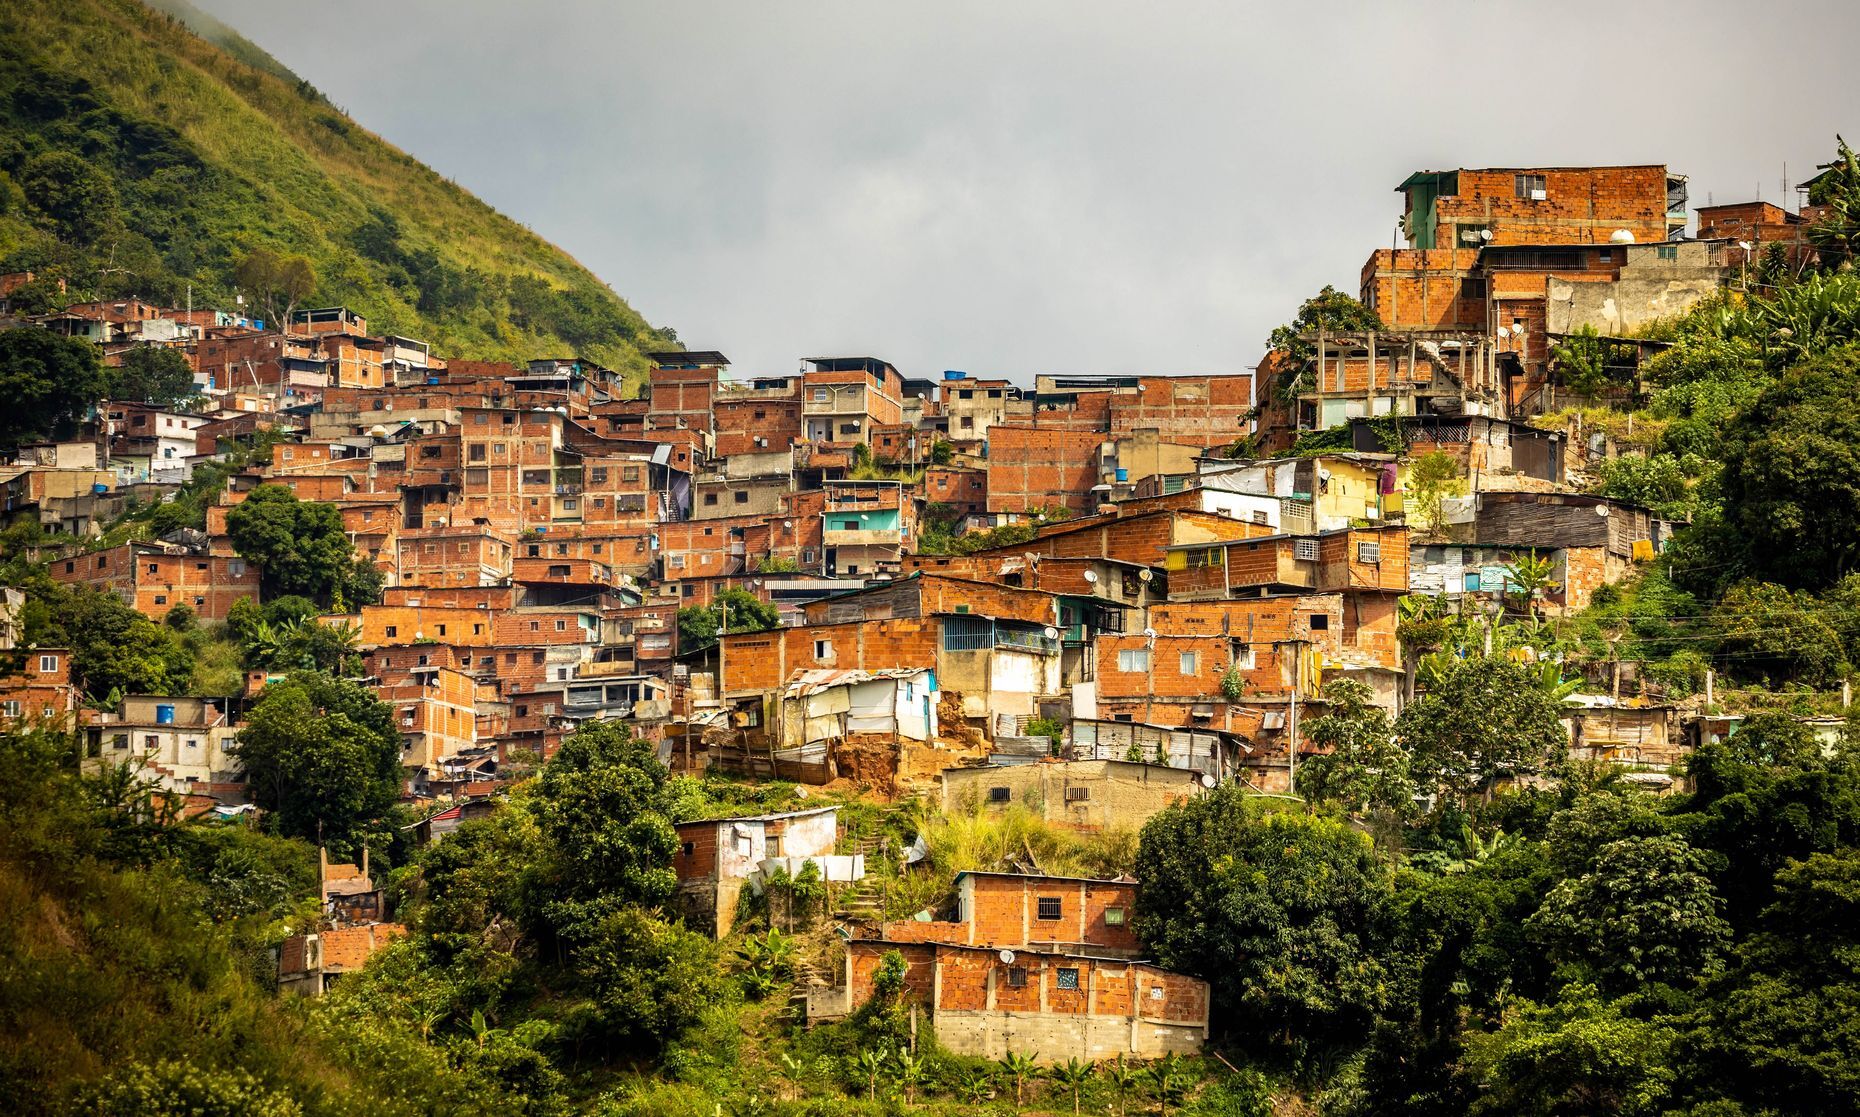 <p>This South American capital city is definitely on the list of worst places to travel in 2024. From criminal activity and civil unrest to kidnapping and <a href="https://travel.state.gov/content/travel/en/traveladvisories/traveladvisories/venezuela-travel-advisory.html#:~:text=Do%20not%20travel%20to%20Venezuela,terrorism%2C%20and%20poor%20health%20infrastructure.">arbitrary enforcement</a> of local laws, tourists will want to give a wide berth to Caracas, Venezuela. This densely overpopulated and polluted city is a pretty dangerous place and recent <a href="https://www.reuters.com/markets/currencies/venezuelas-anti-inflation-efforts-dealt-blow-currency-tumbles-2022-11-24/">economic unrest</a> makes it even worse. Instead, head to the <a href="https://www.britannica.com/place/Altiplano#:~:text=Altiplano%2C%20region%20of%20southeastern%20Peru,3%2C650%20metres)%20above%20sea%20level.">Altiplano</a> region in Bolivia.</p>